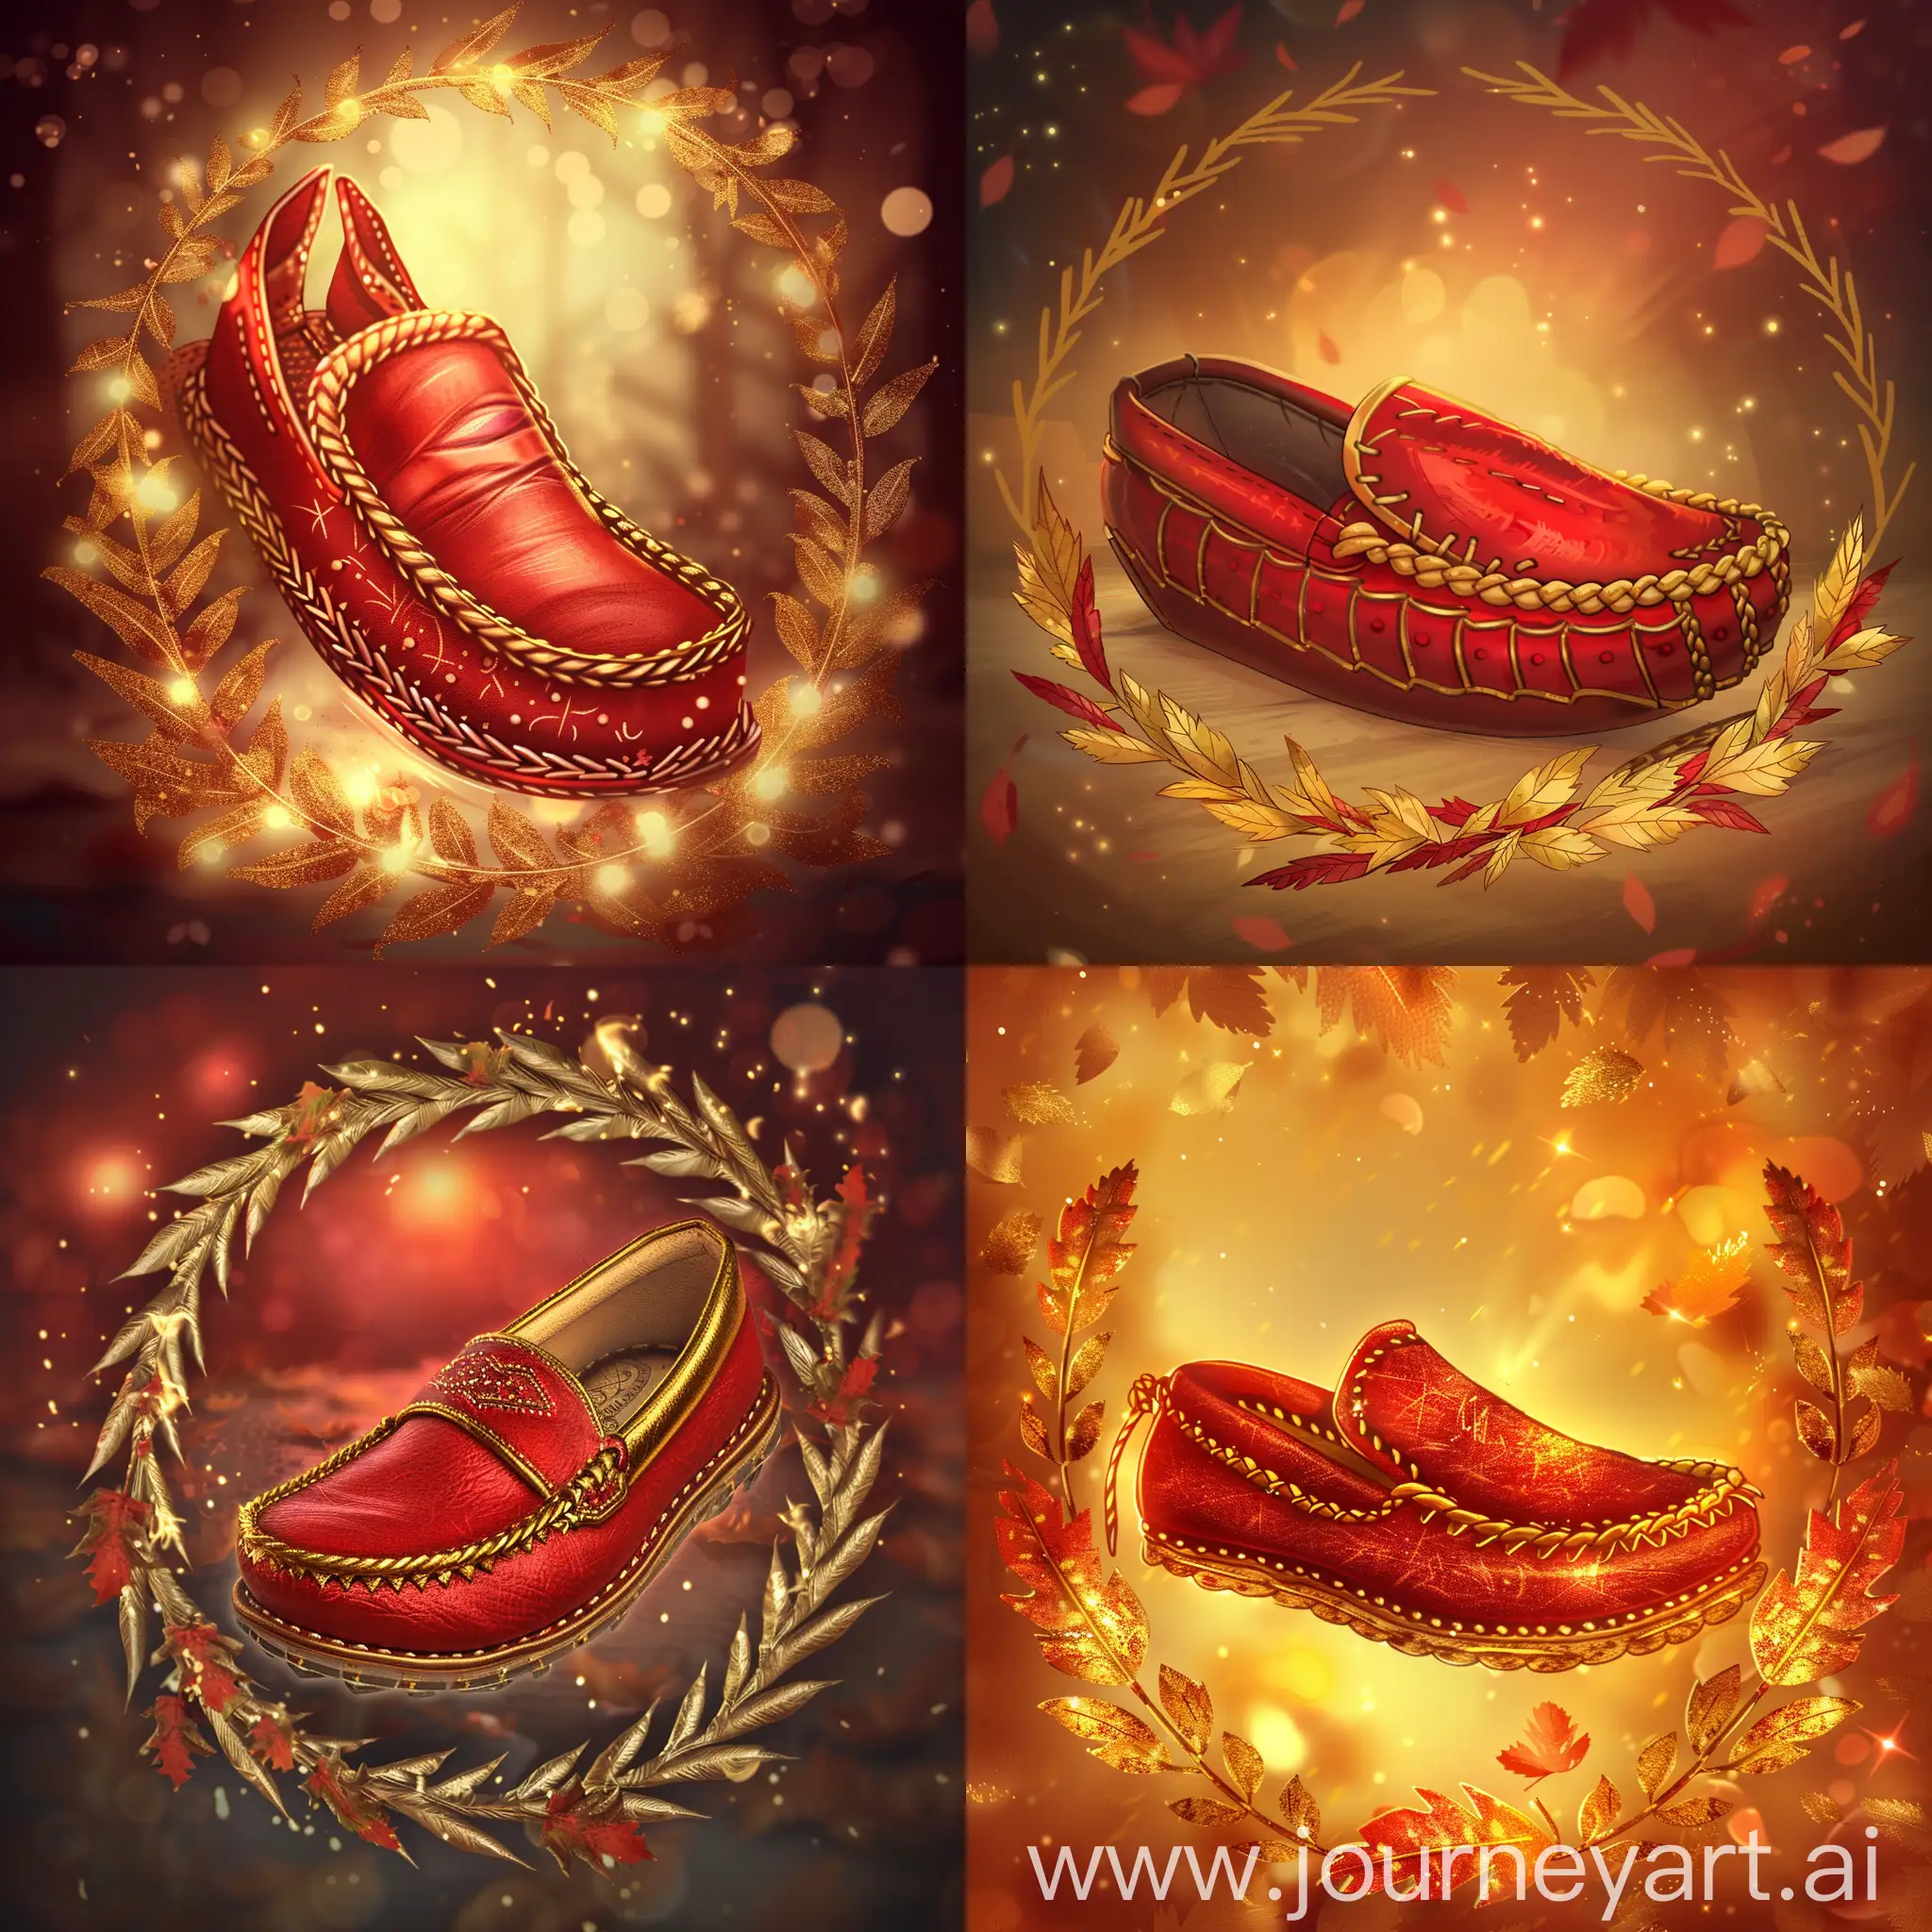 Elegant-Red-Moccasin-with-Golden-Trim-Surrounded-by-a-Luxurious-Wreath